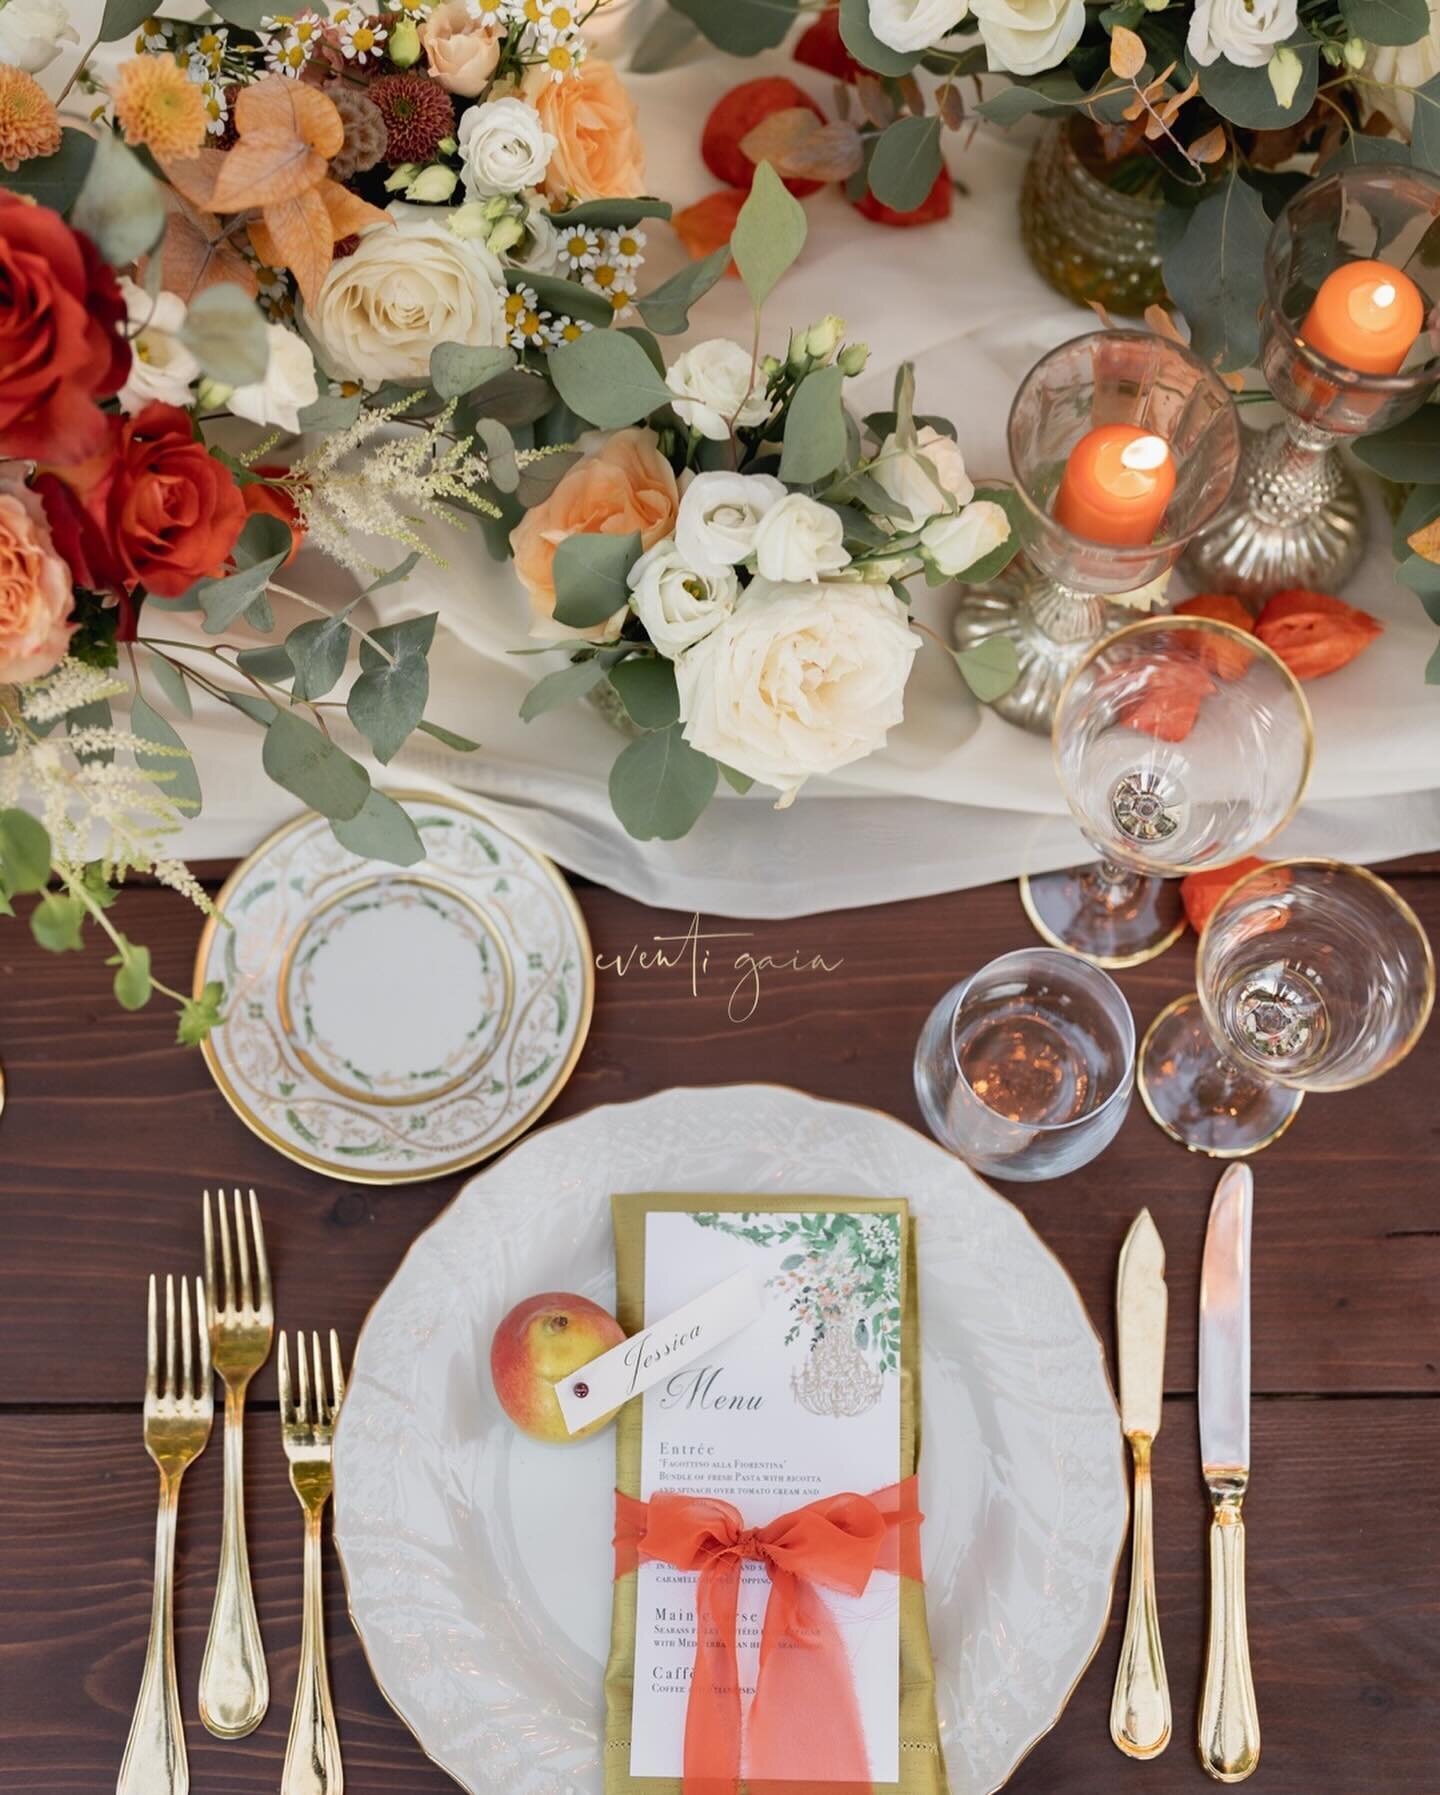 Delve into the exquisite details of table settings. 
Will you embrace the rustic allure of earthy tones, evoking warmth and intimacy, or surrender to the serene beauty of ocean hues, whispering tales of romance and adventure? 

The choice is yours. ?